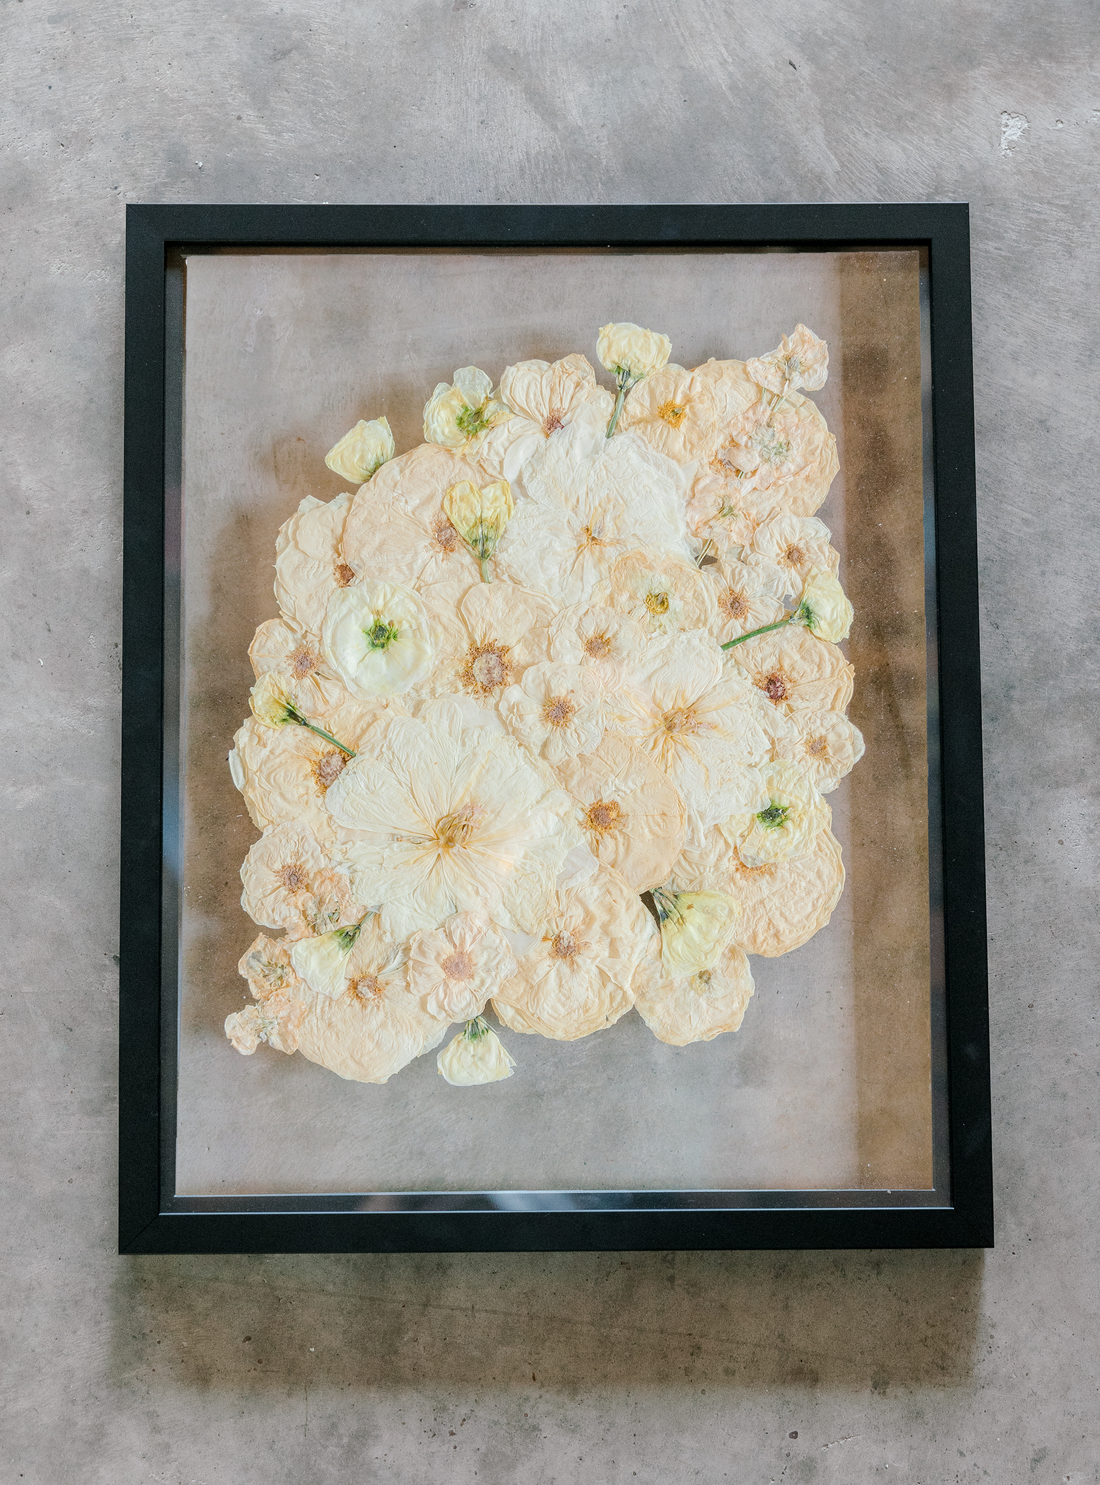 An all white ball bouquet pressed and preserved into a black frame against concrete.